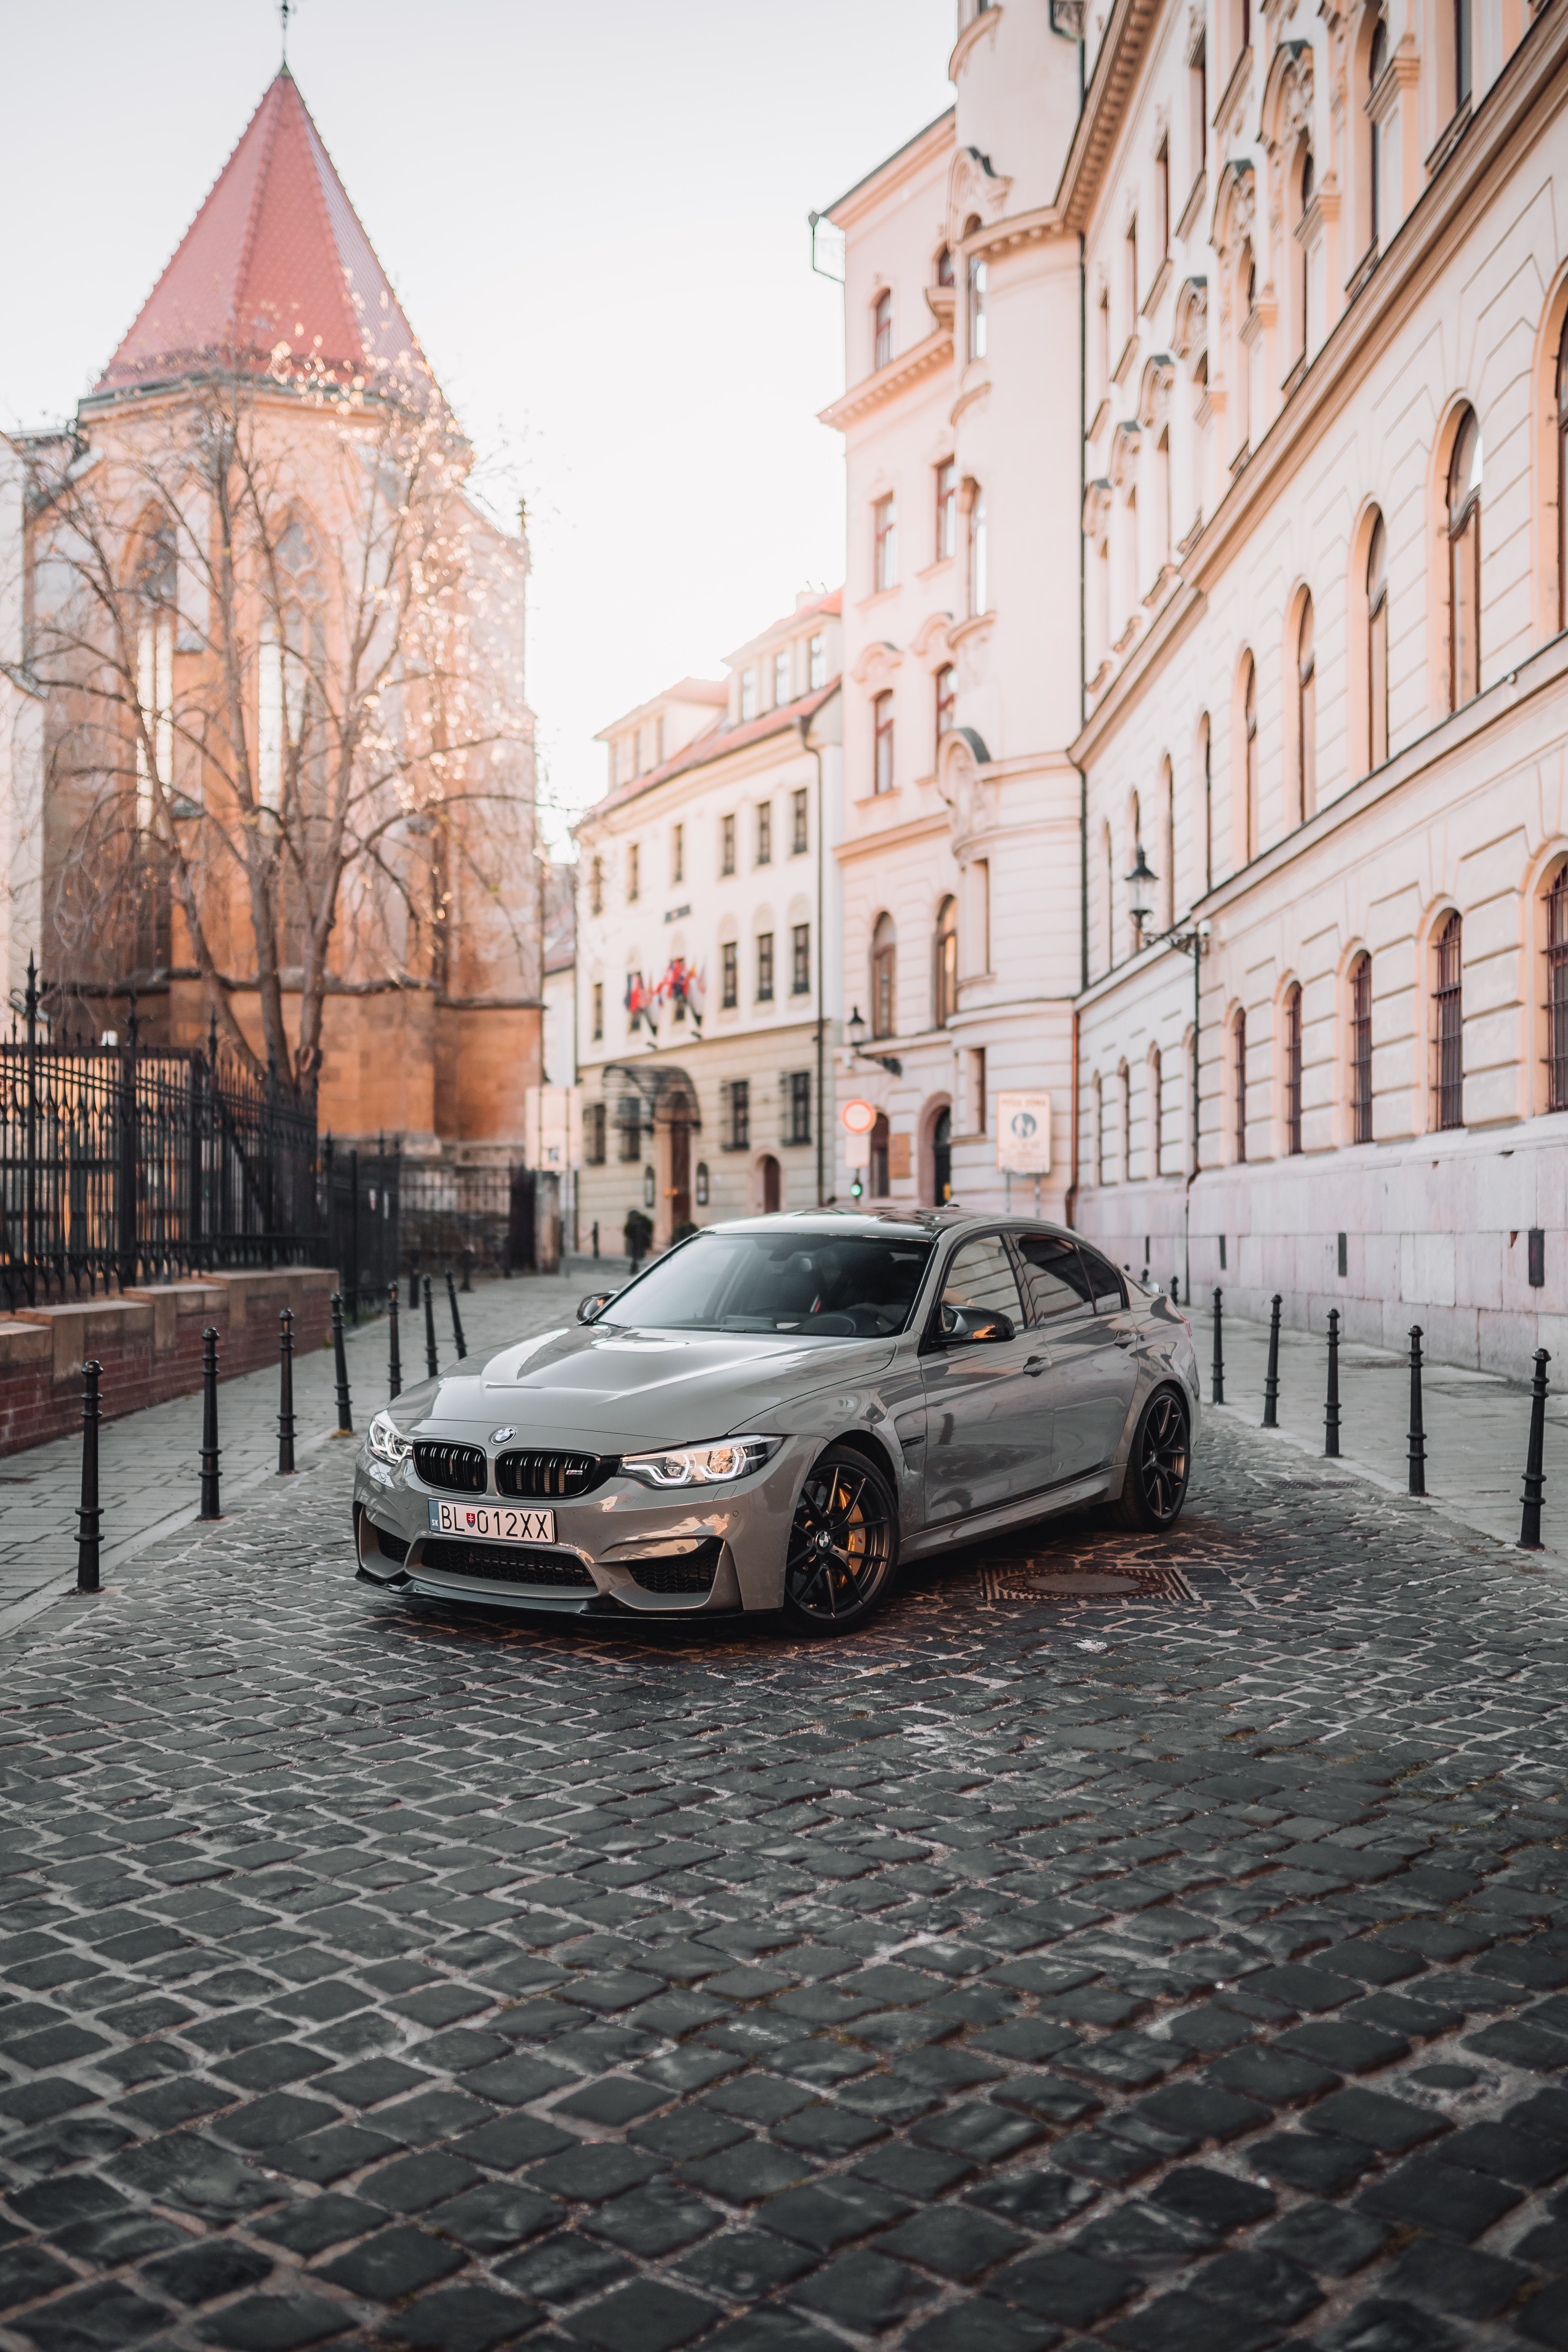 bmw, cars, front view, grey, street